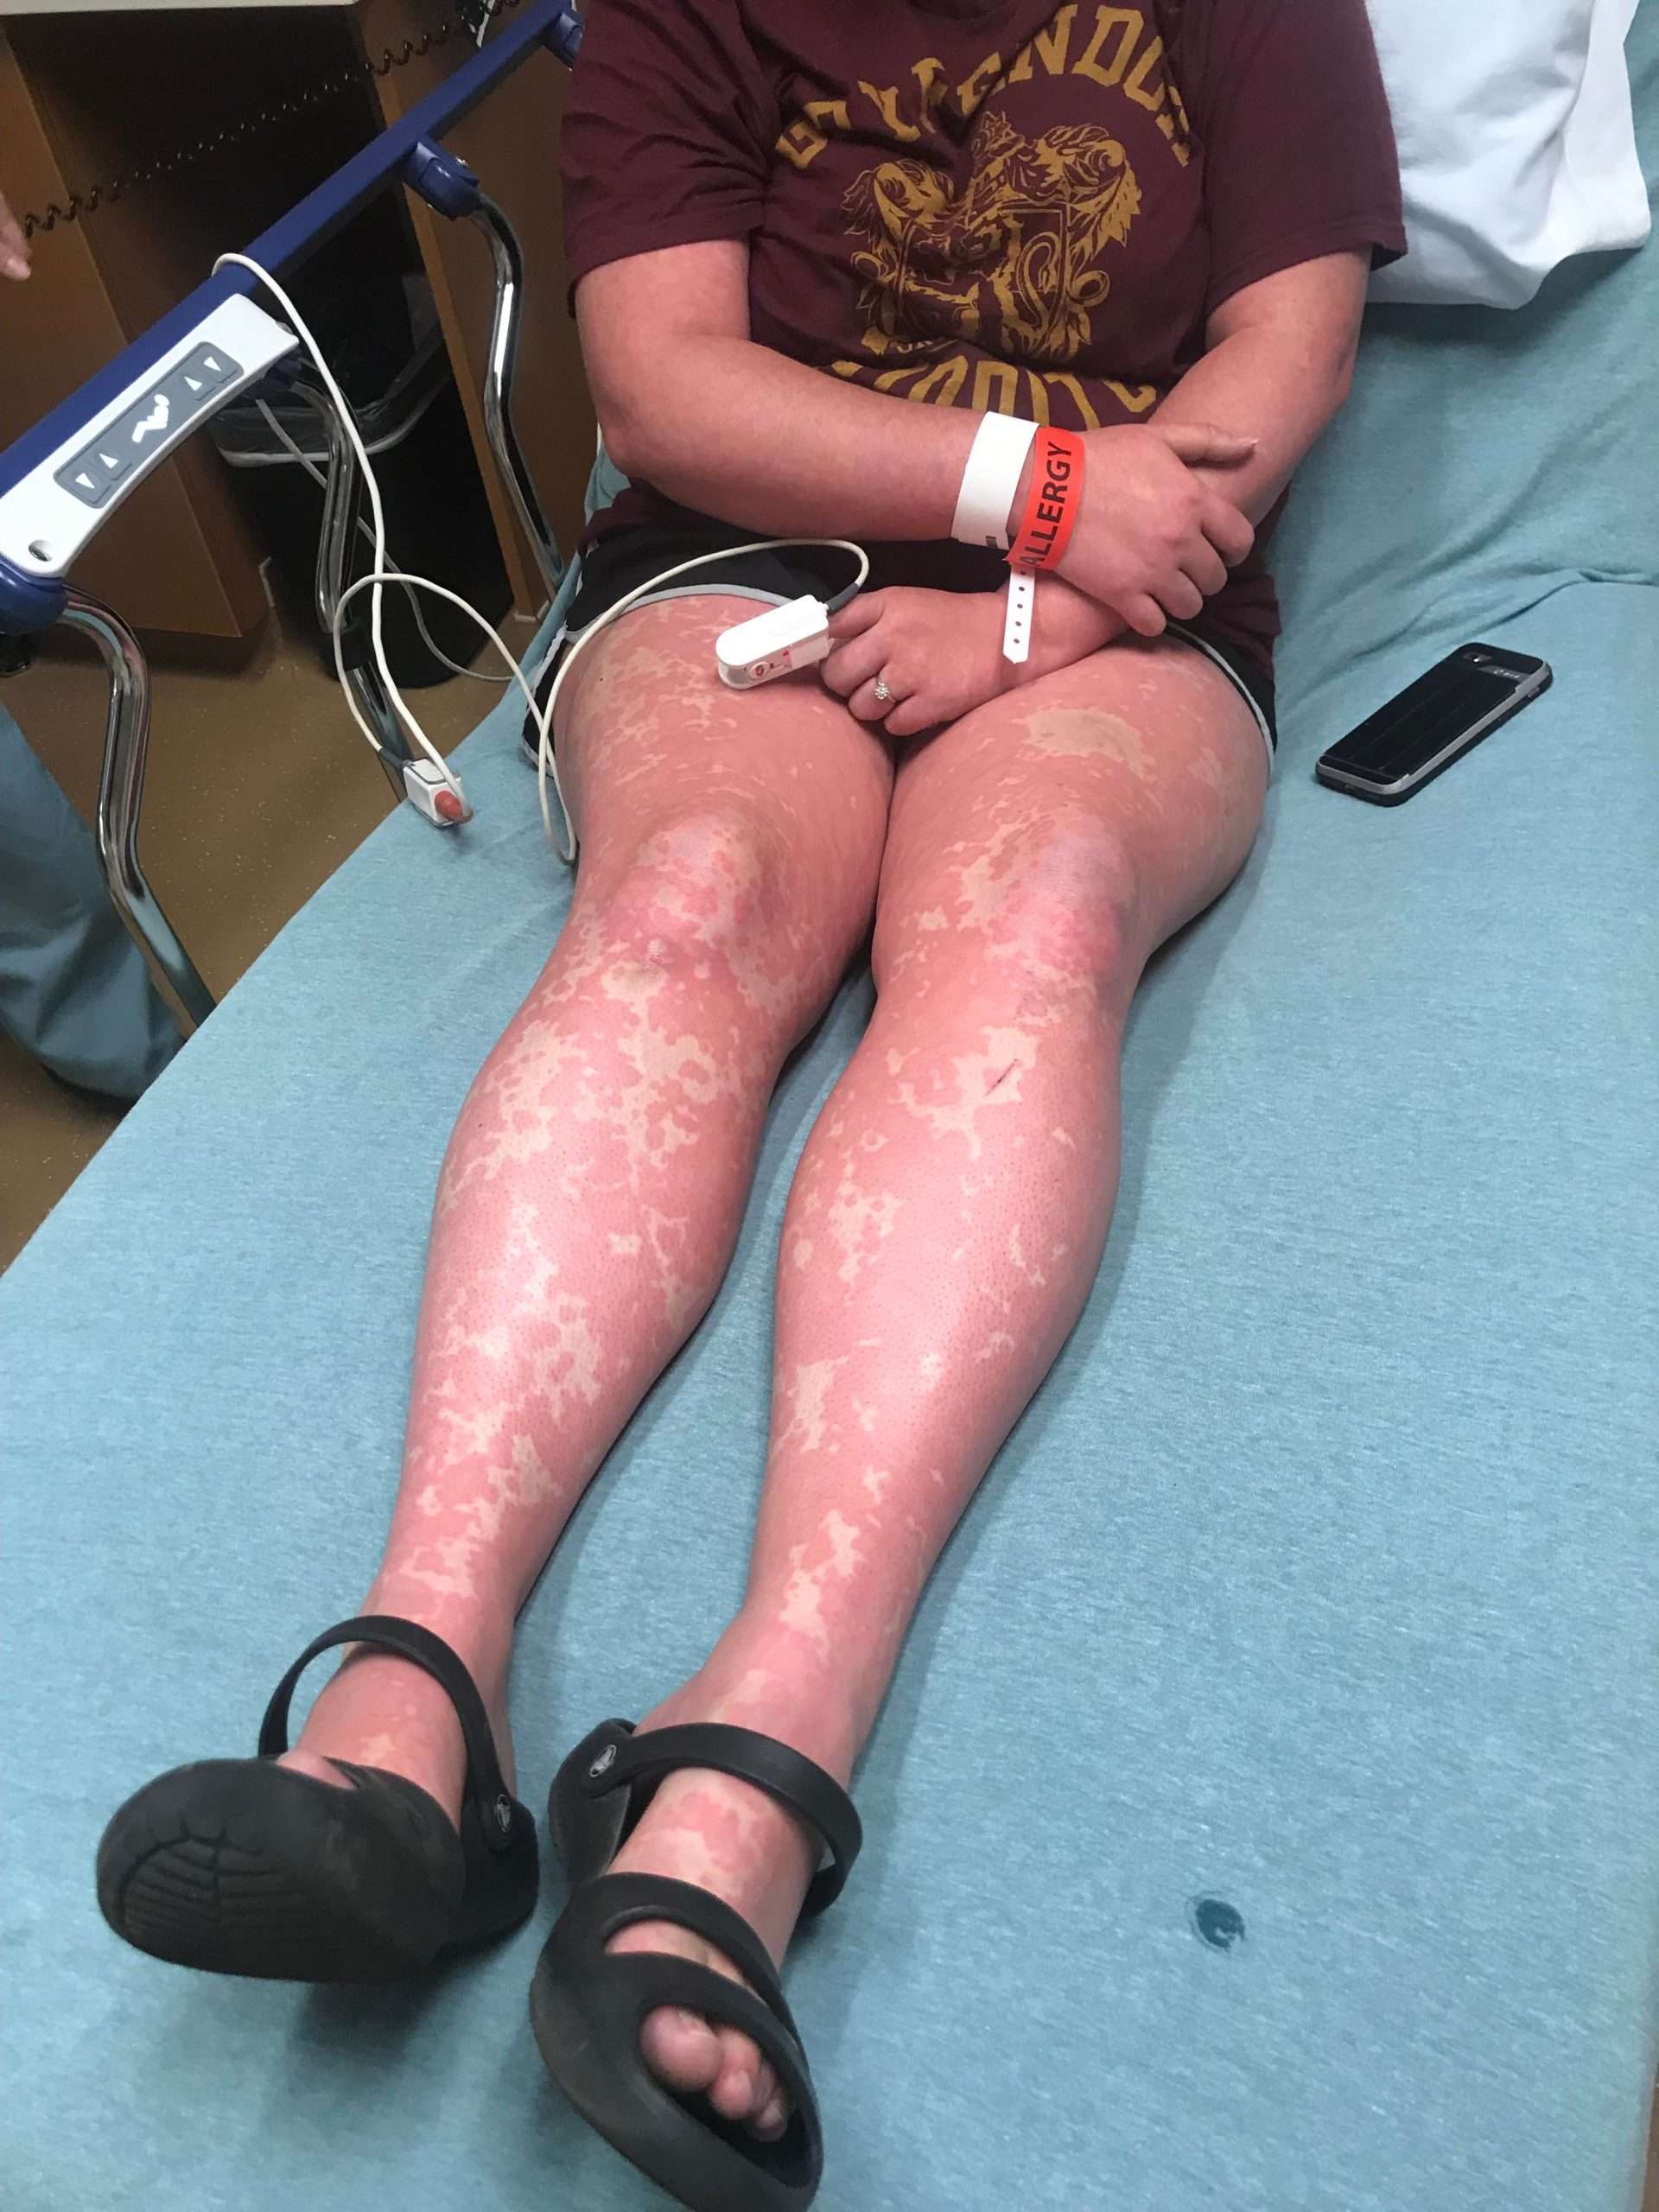 A delayed reaction to an allergy test leads to an ER visit ...